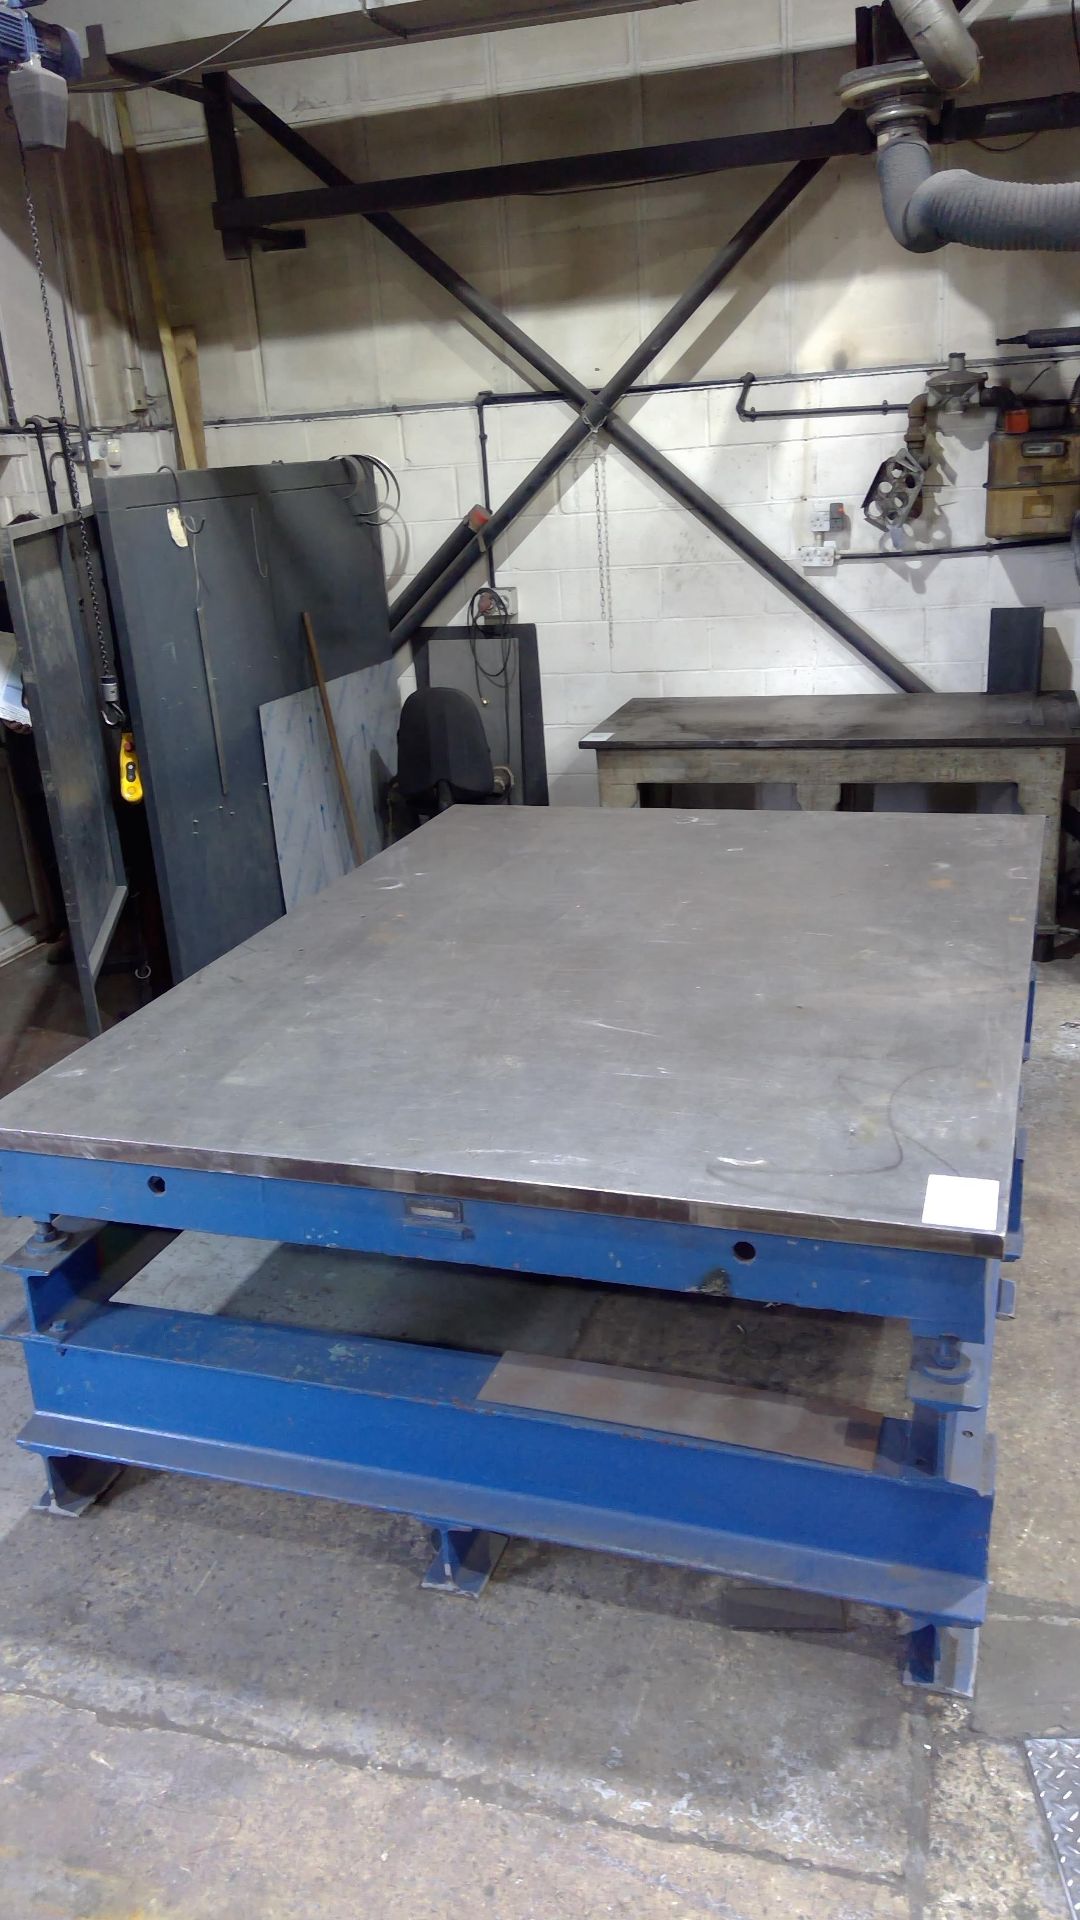 Heavy duty adjustable surface table approx 2.44m x 1.83m